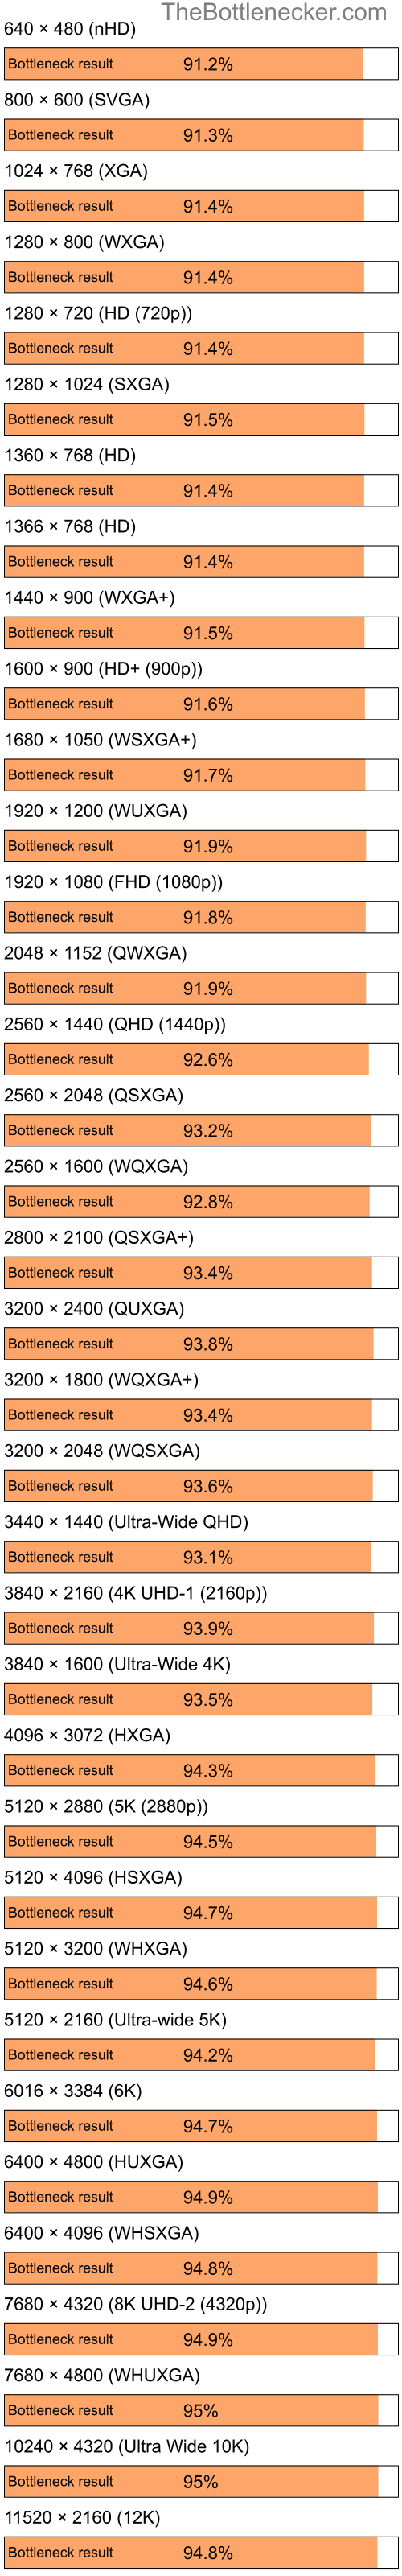 Bottleneck results by resolution for Intel Celeron M 410 and AMD Mobility Radeon 9200 in General Tasks